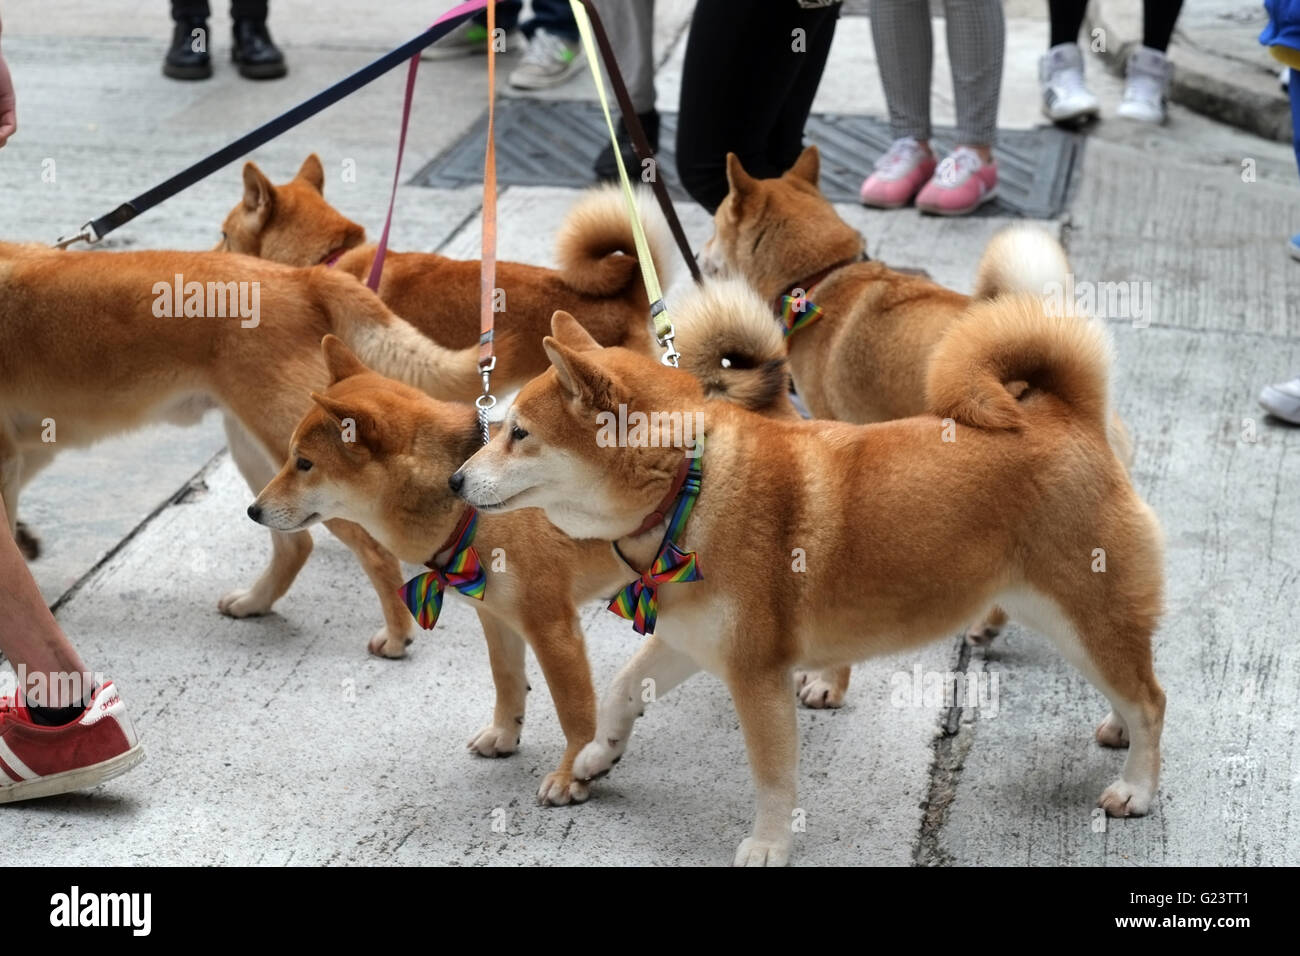 Dogs being walked by professional dog walker, Hong Kong Stock Photo - Alamy